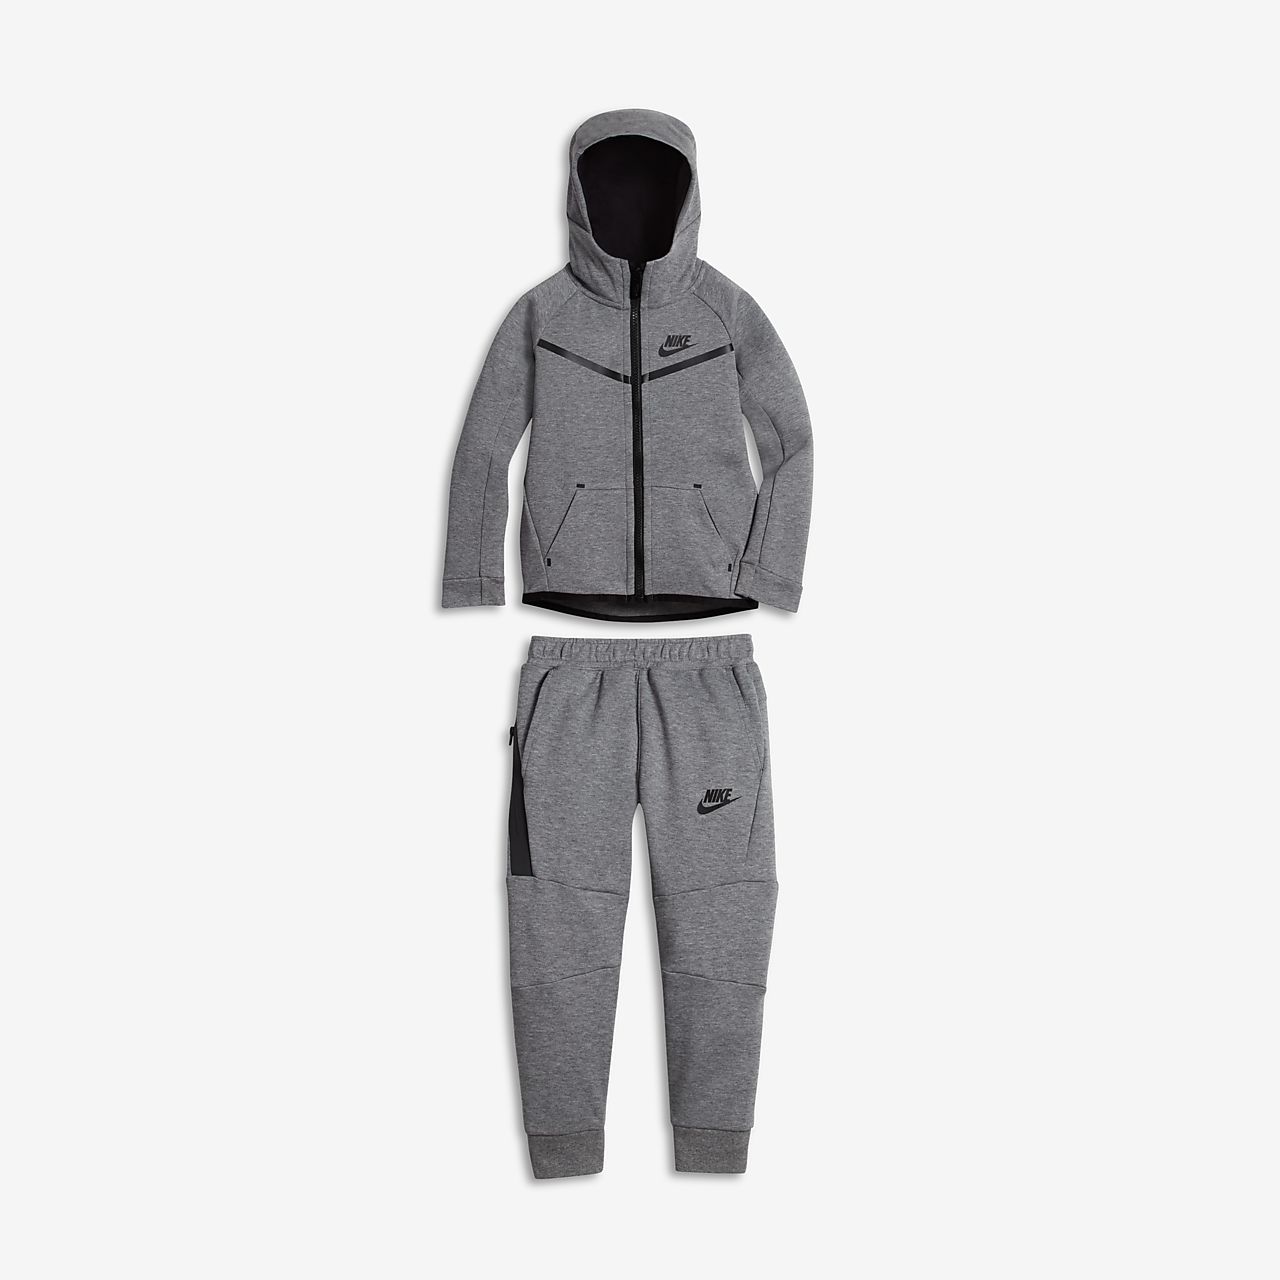 Buy nike sweat suits > up to 57% Discounts